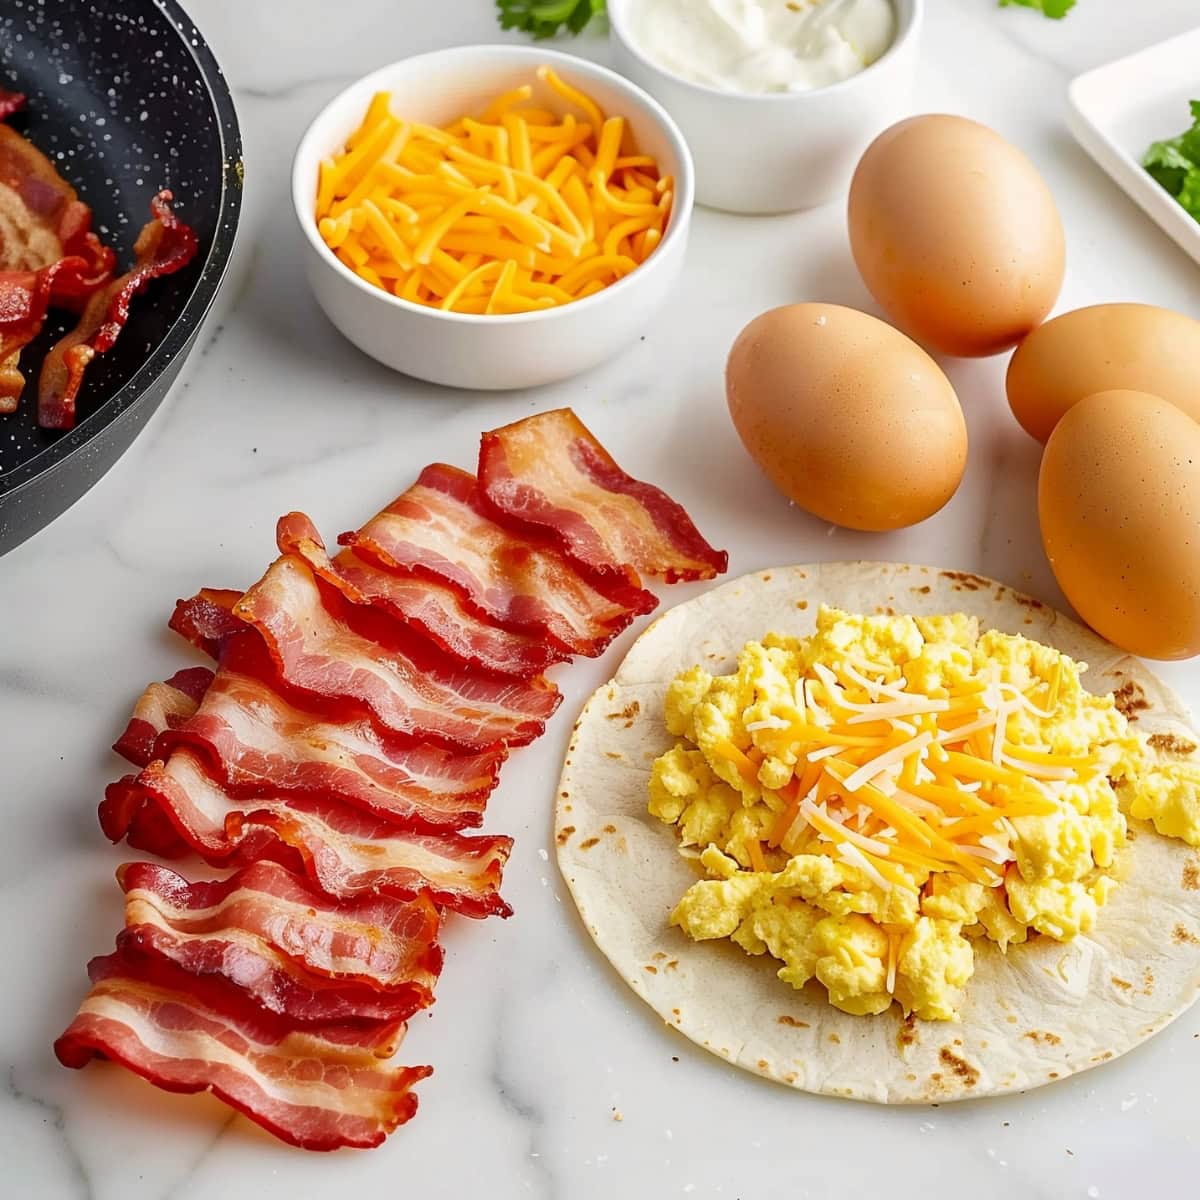 Bacon and breakfast wrap ingredients: Bacon, Scrambled Eggs and Cheese.